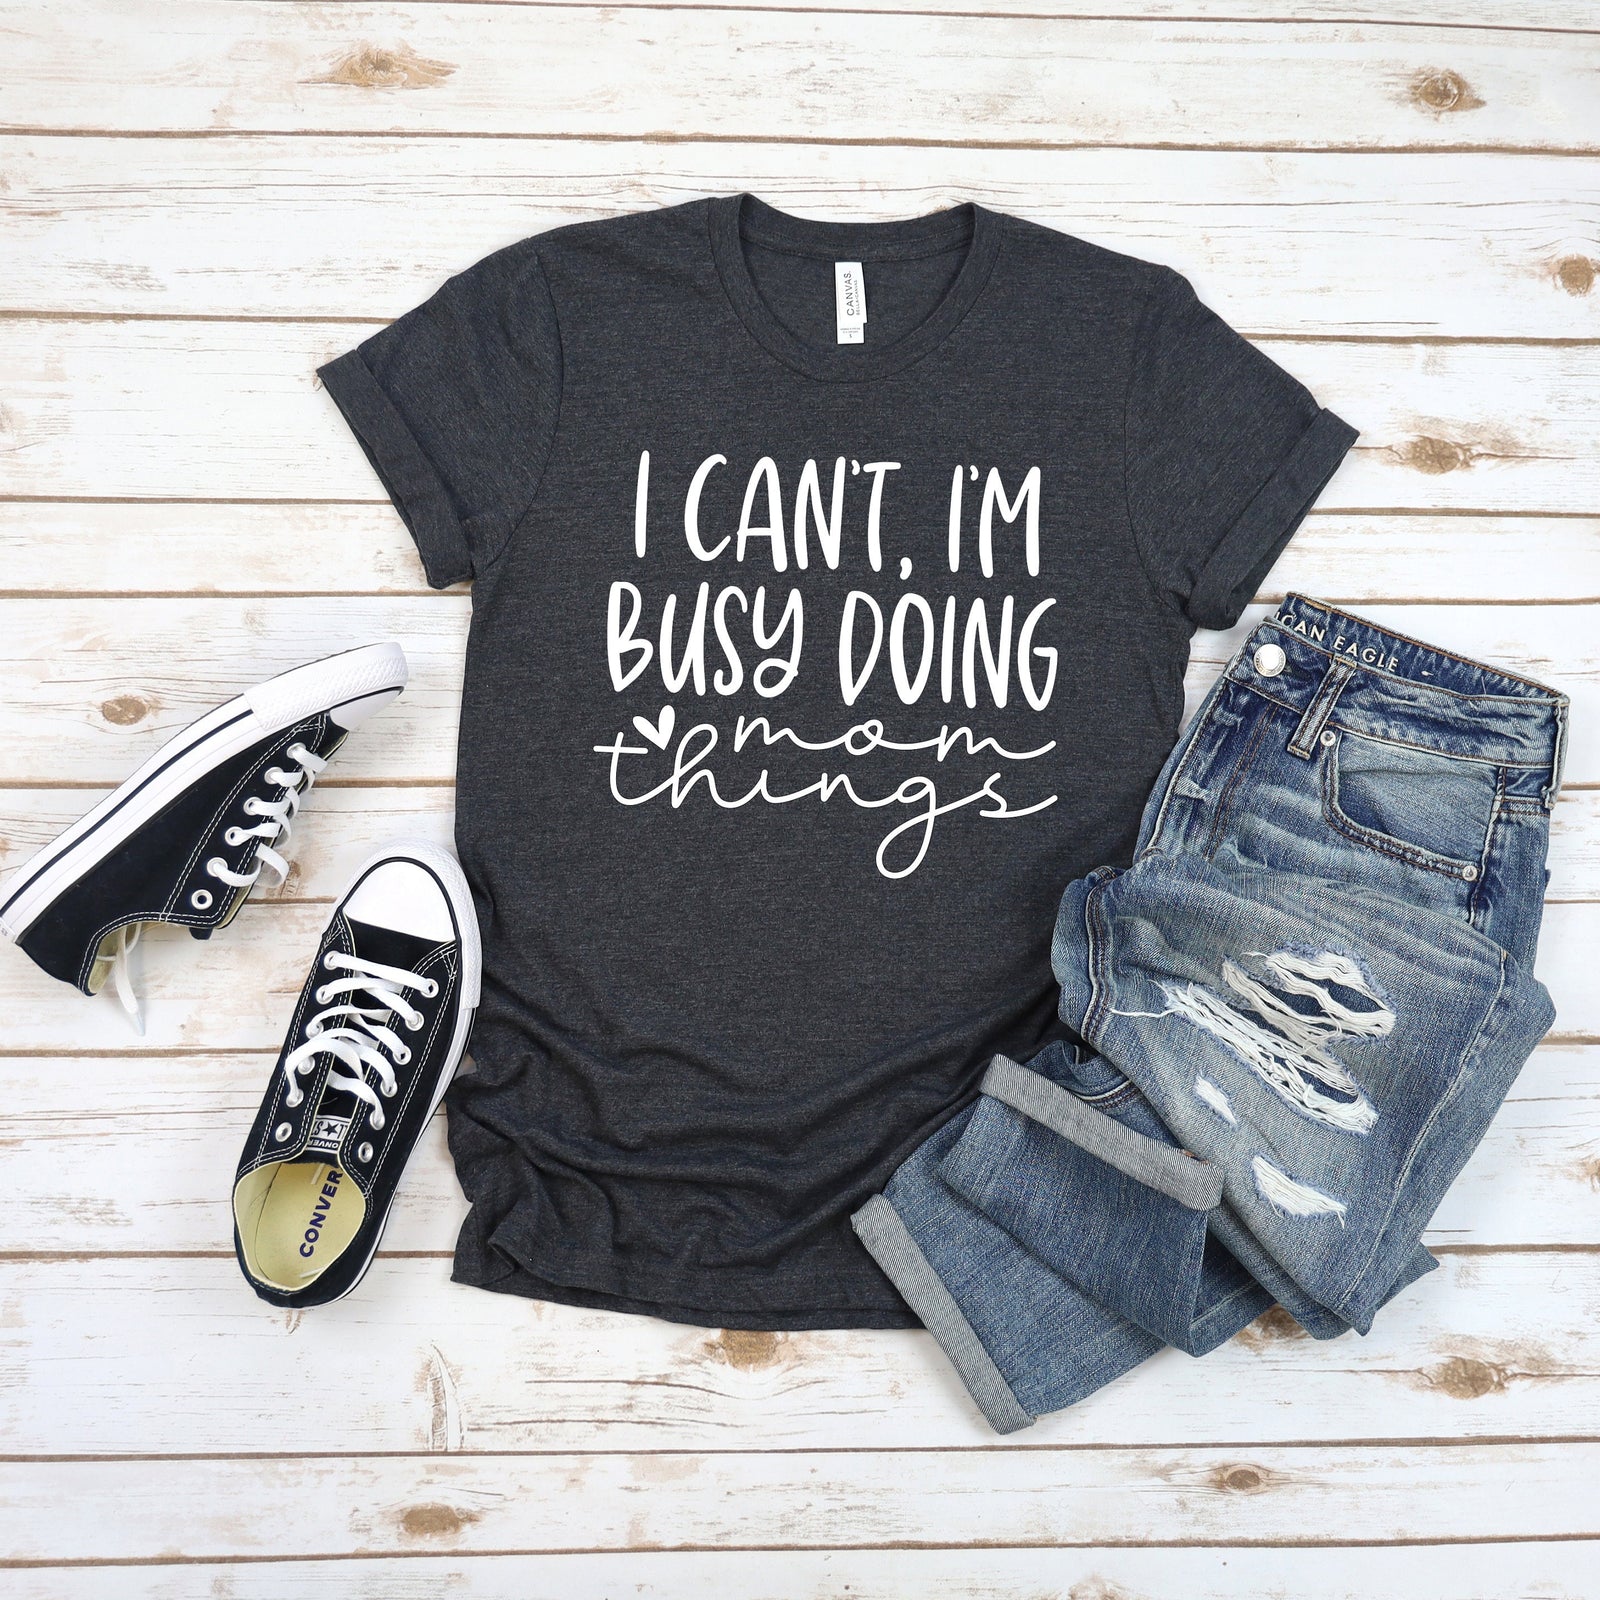 I Can't I'm Busy Doing Mom Things Adult Unisex T Shirt -Mother's Day Gift Idea  - Mom tee - Funny Mom Shirts